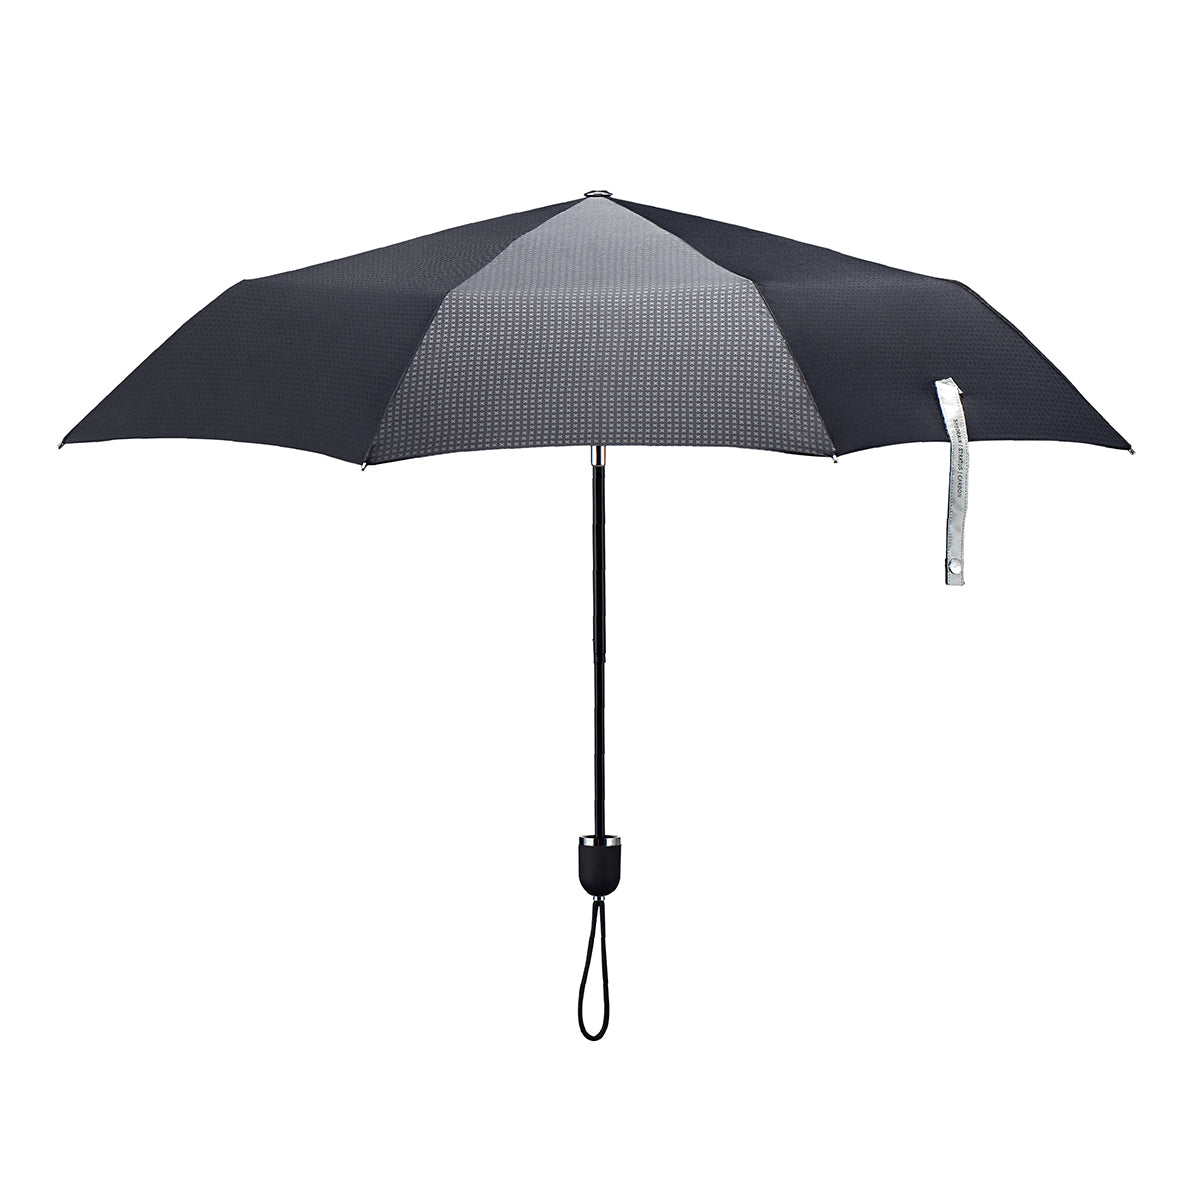 straight on view of a handmade manual open compact luxury umbrella with a matte black TPR grip handle, detachable waxed cotton wrist strap, Teflon-coated fine denier woven black polyester twill canopy, chrome trim, Trilobe aircraft aluminum shaft, fiberglass ribs, and a reflective strap embroidered with “ShedRain Stratus.”